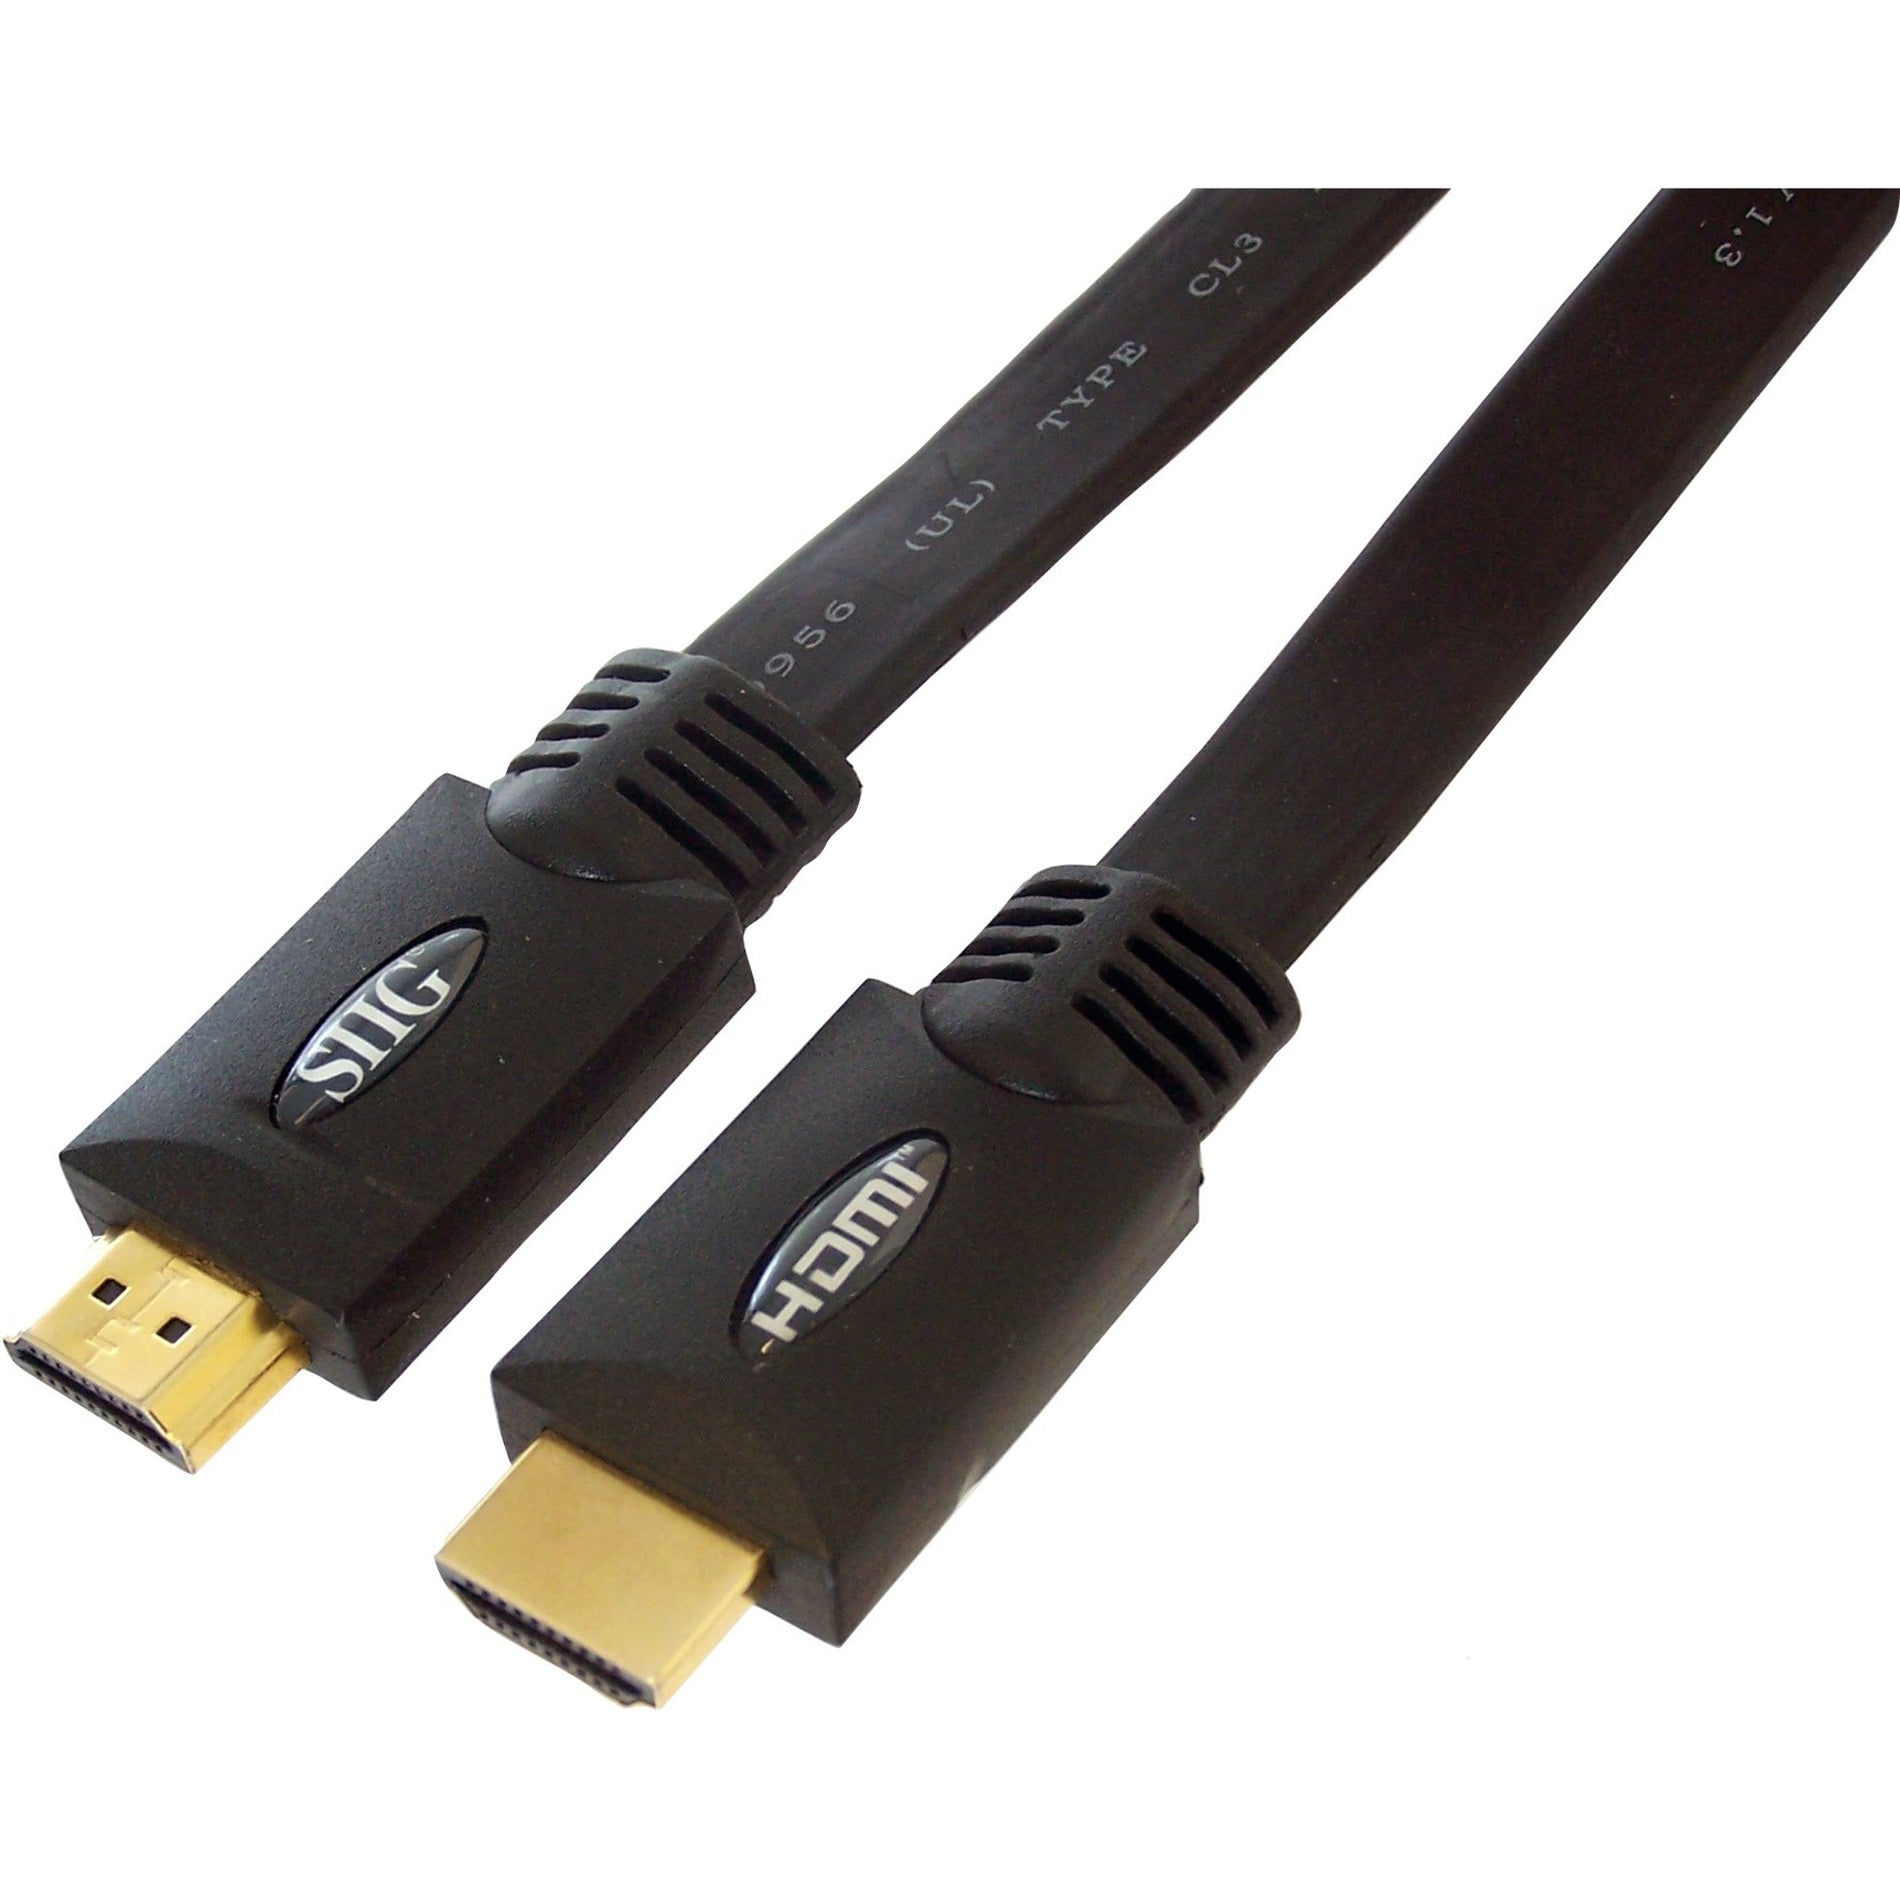 SIIG CB-HM0312-S1 High-quality Flat High Speed HDMI Cable, 32.80 ft, Gold Plated, UL/CL2 in-wall, Lifetime Warranty